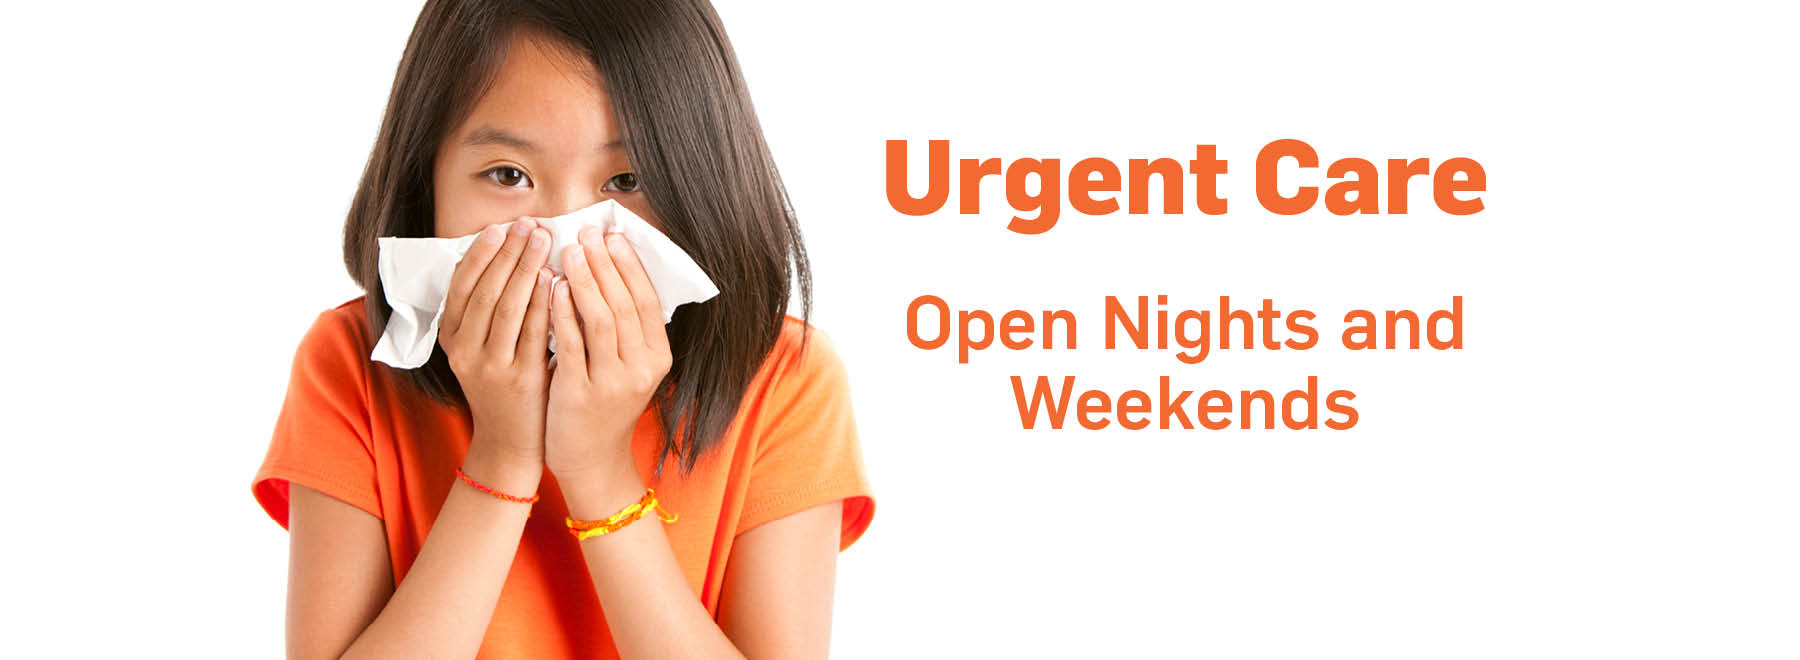 A girl in an orange shirt blows her nose and next to her is text that says Urgent Care Open Nights and Weekends